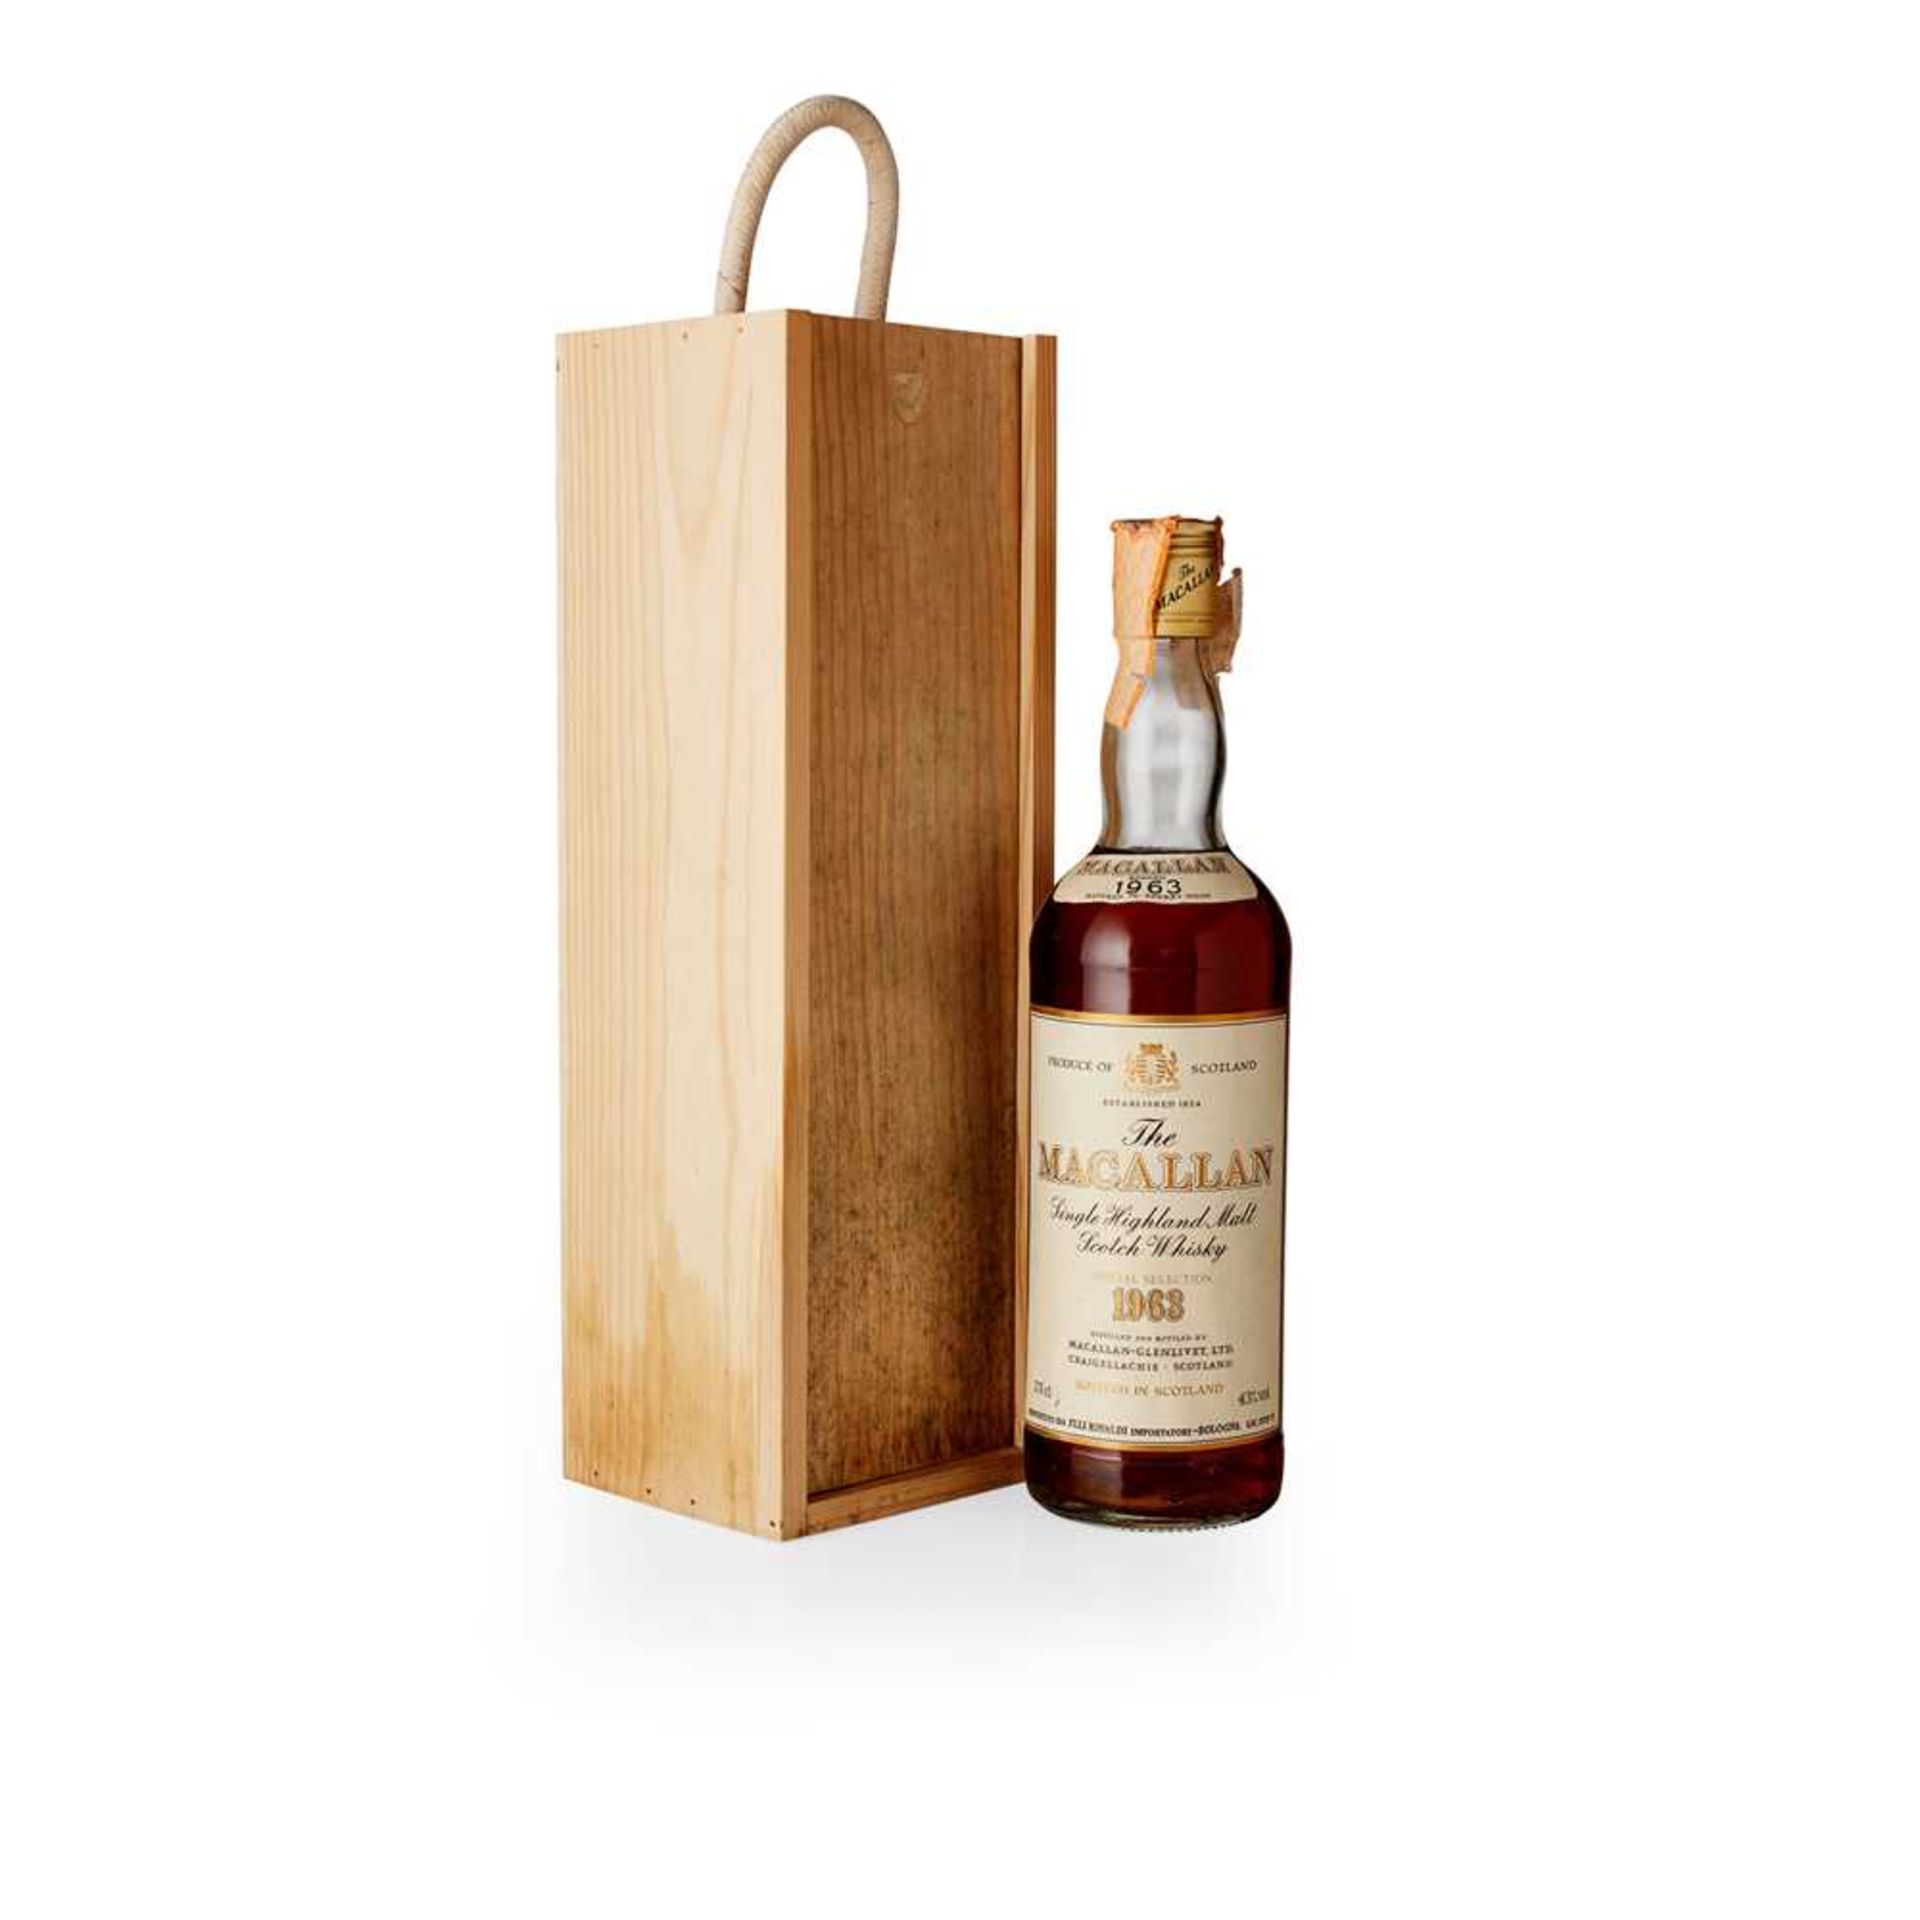 THE MACALLAN 1963 SPECIAL SELECTION - RINALDI IMPORT